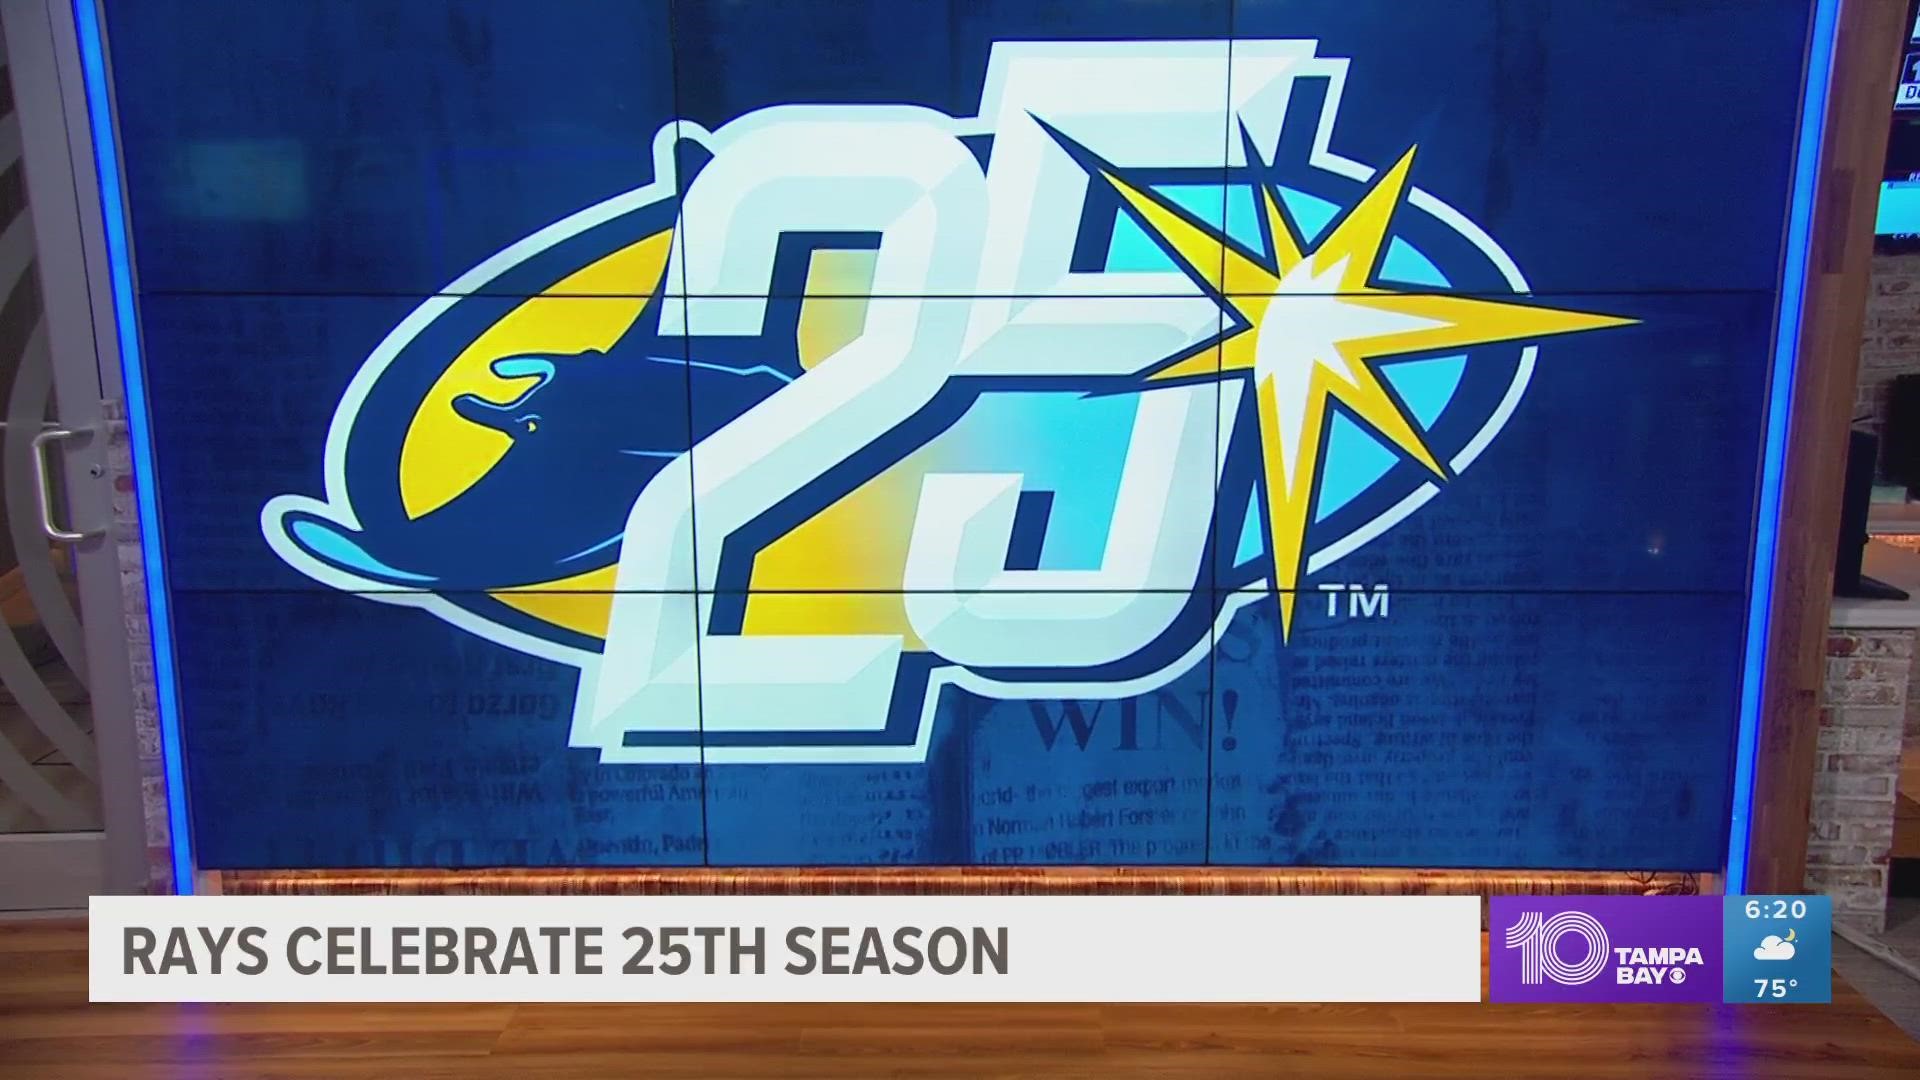 A special logo honoring the 25th season will be worn on Rays jerseys all season long.